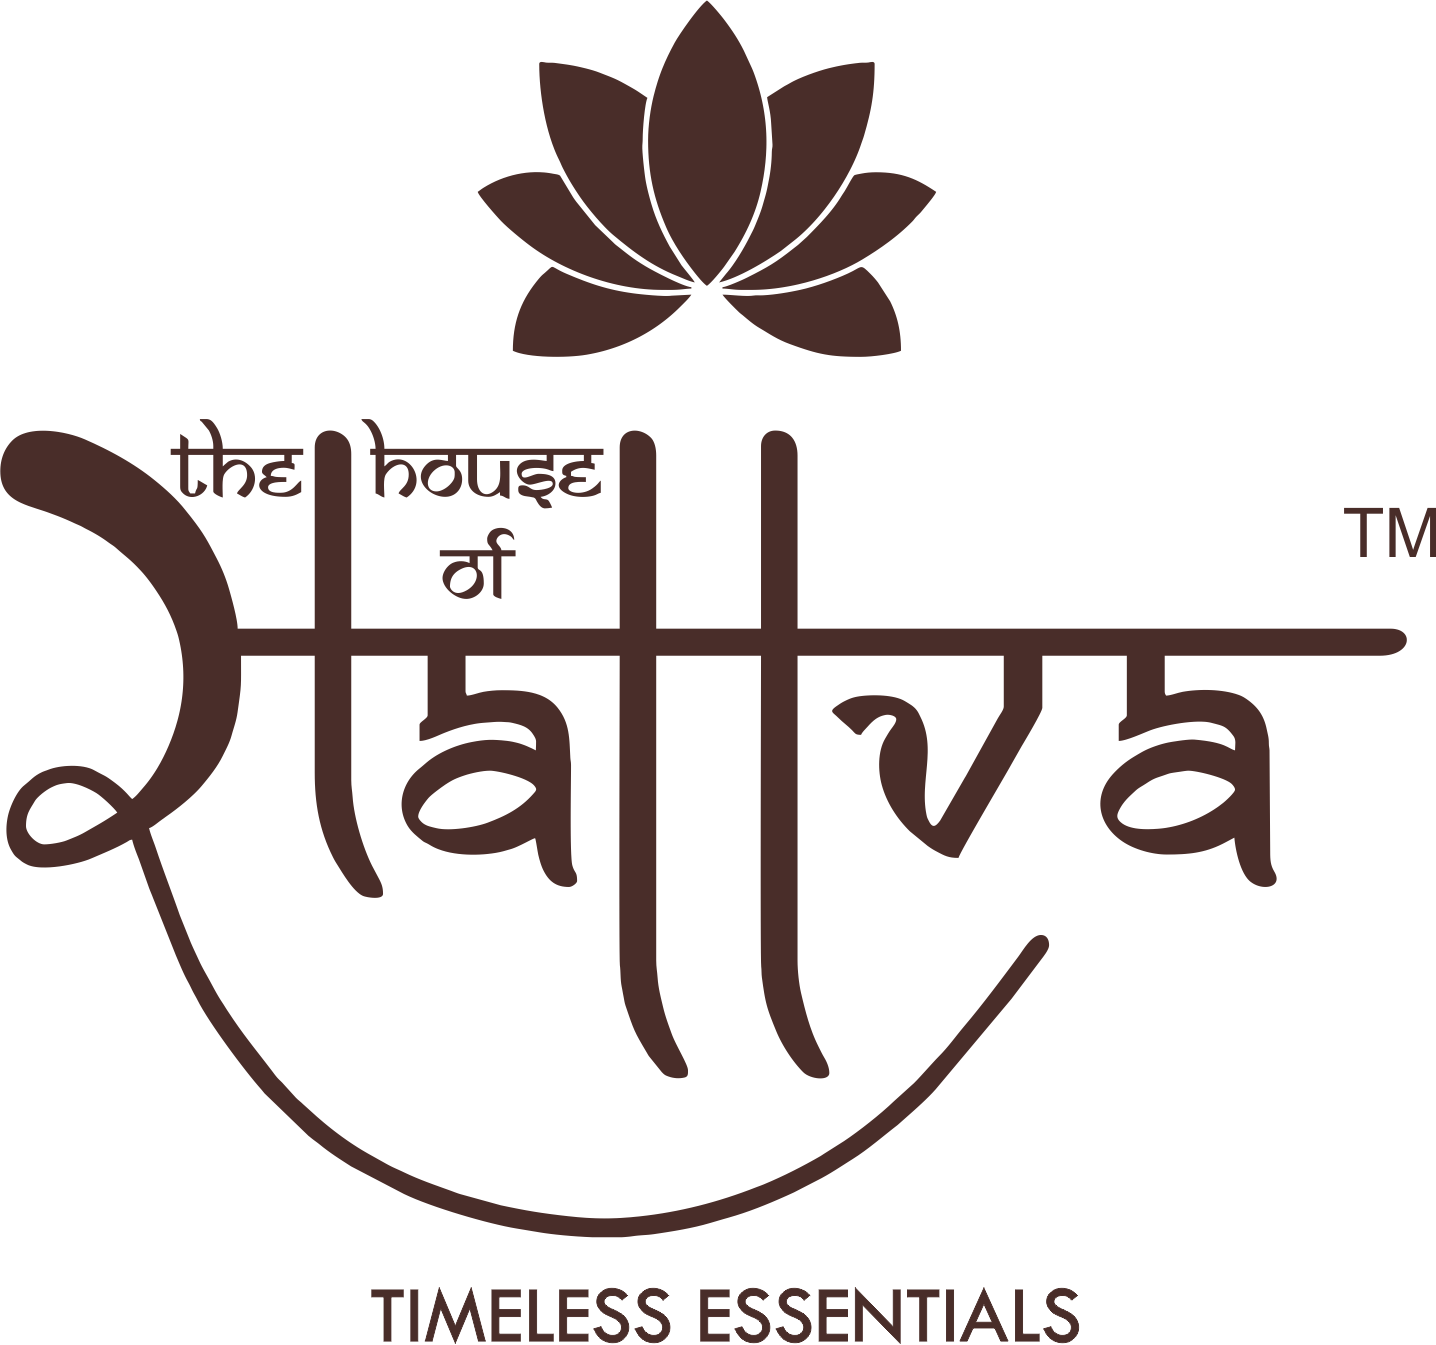 The House of Sattva